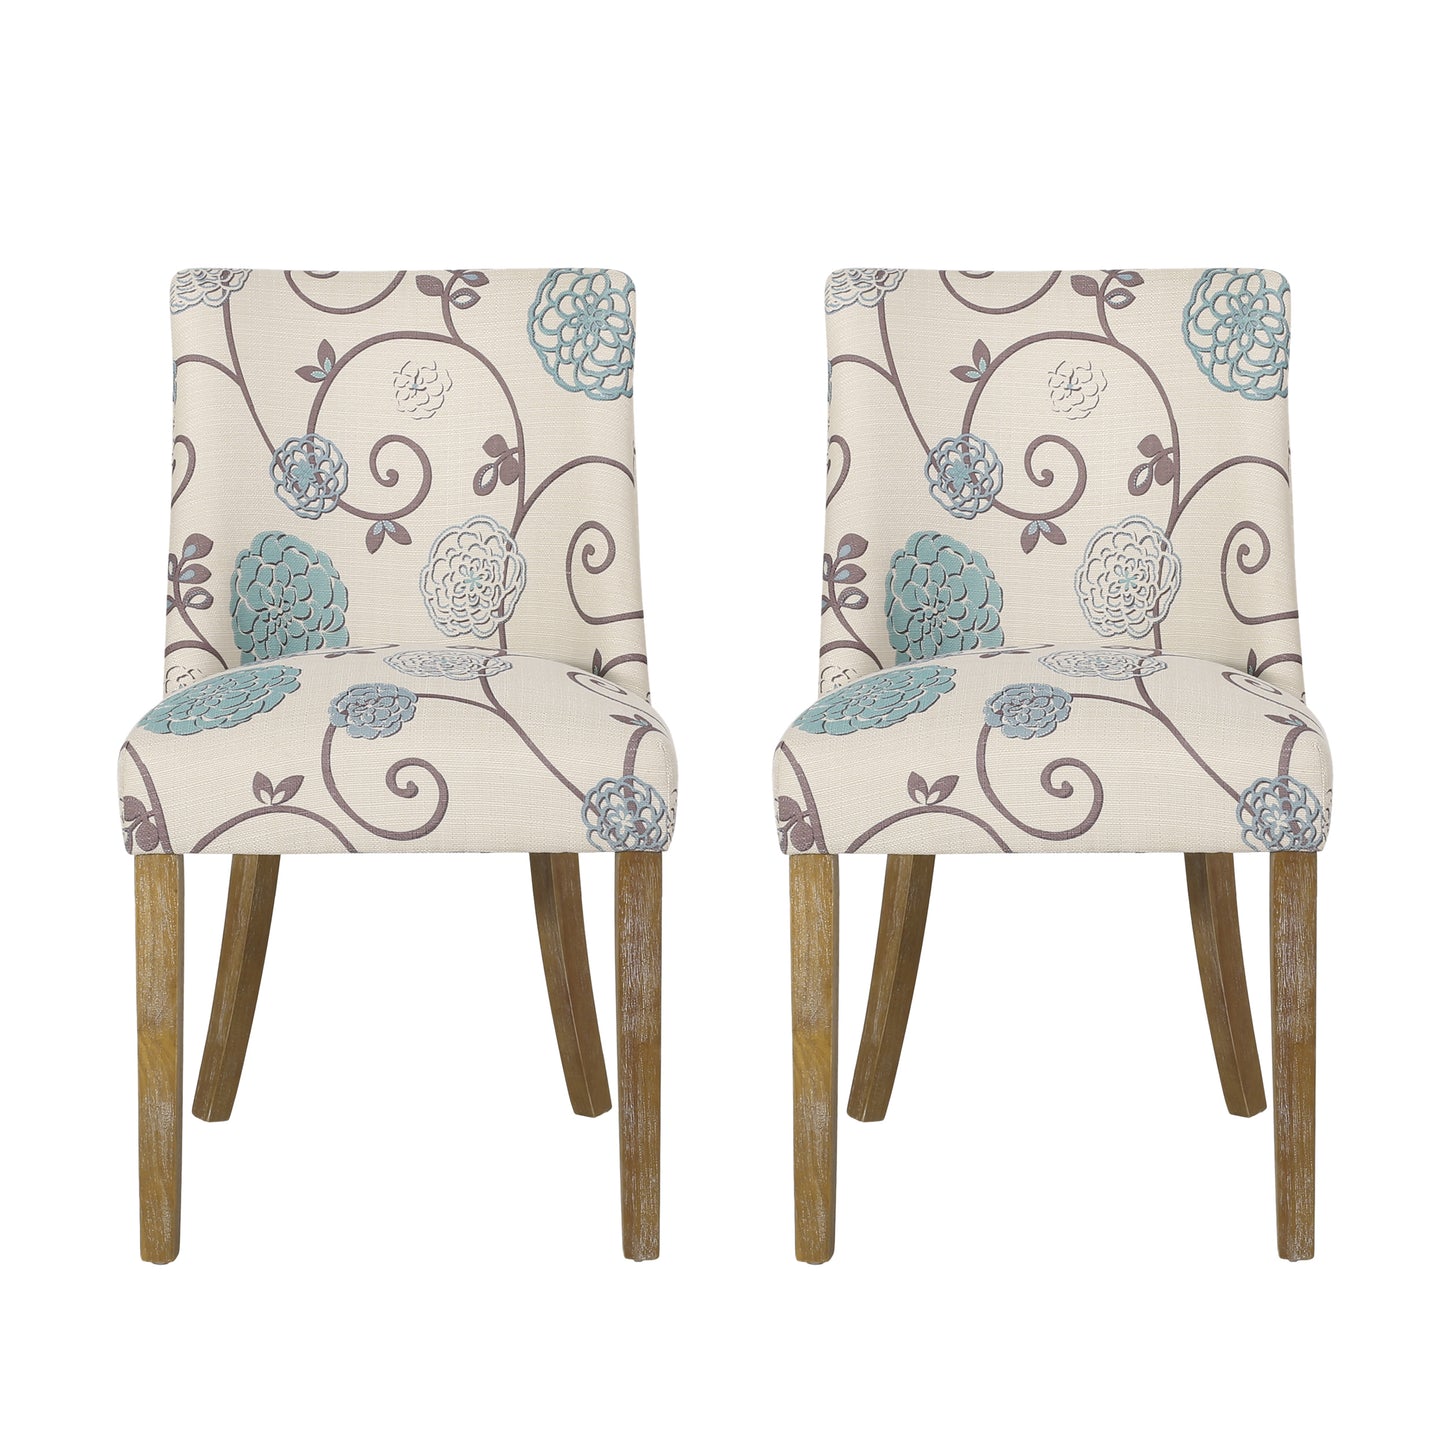 Gladwin Contemporary Fabric Dining Chairs, Set of 2